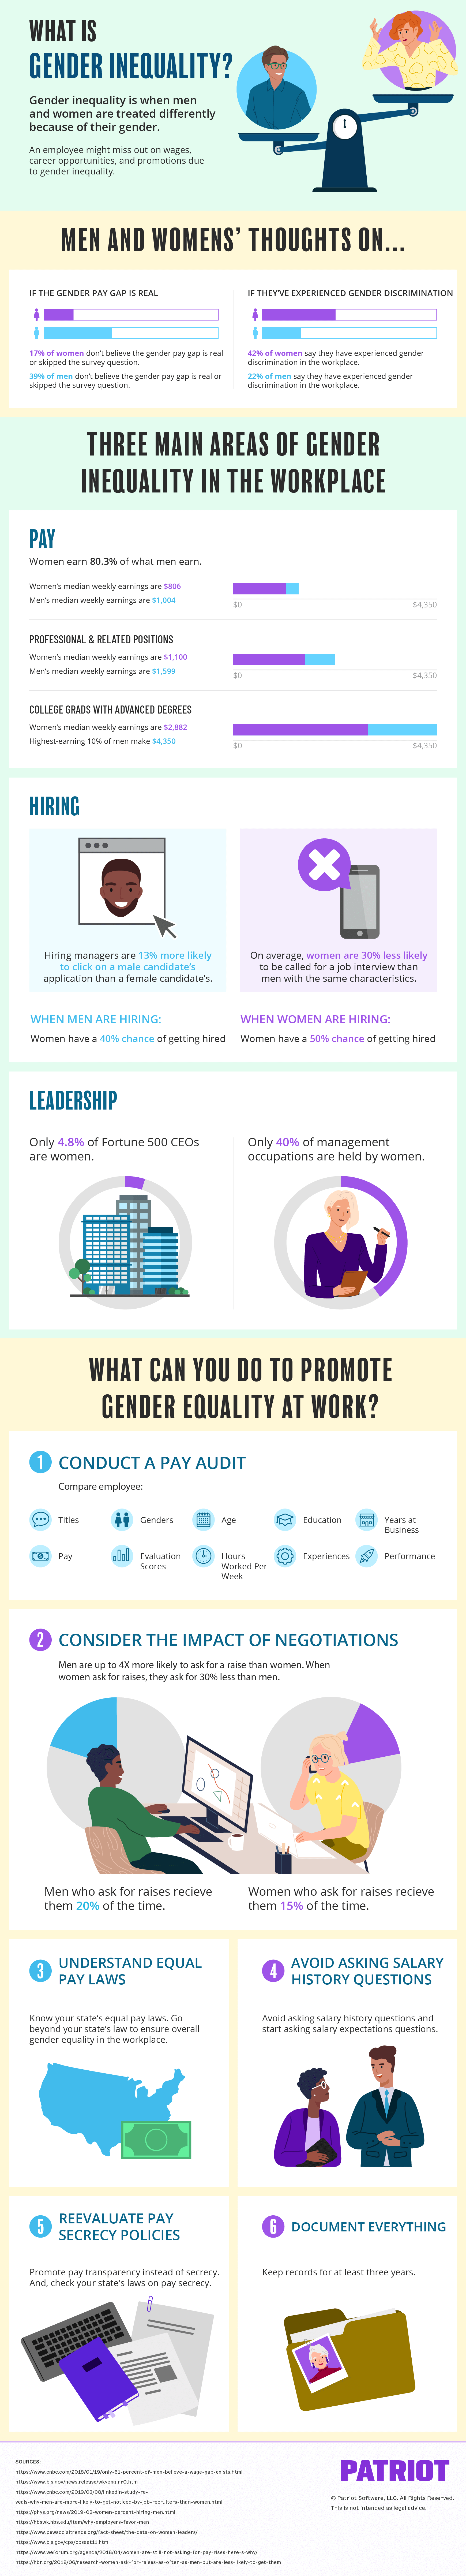 infographic detailing gender equality in the workplace